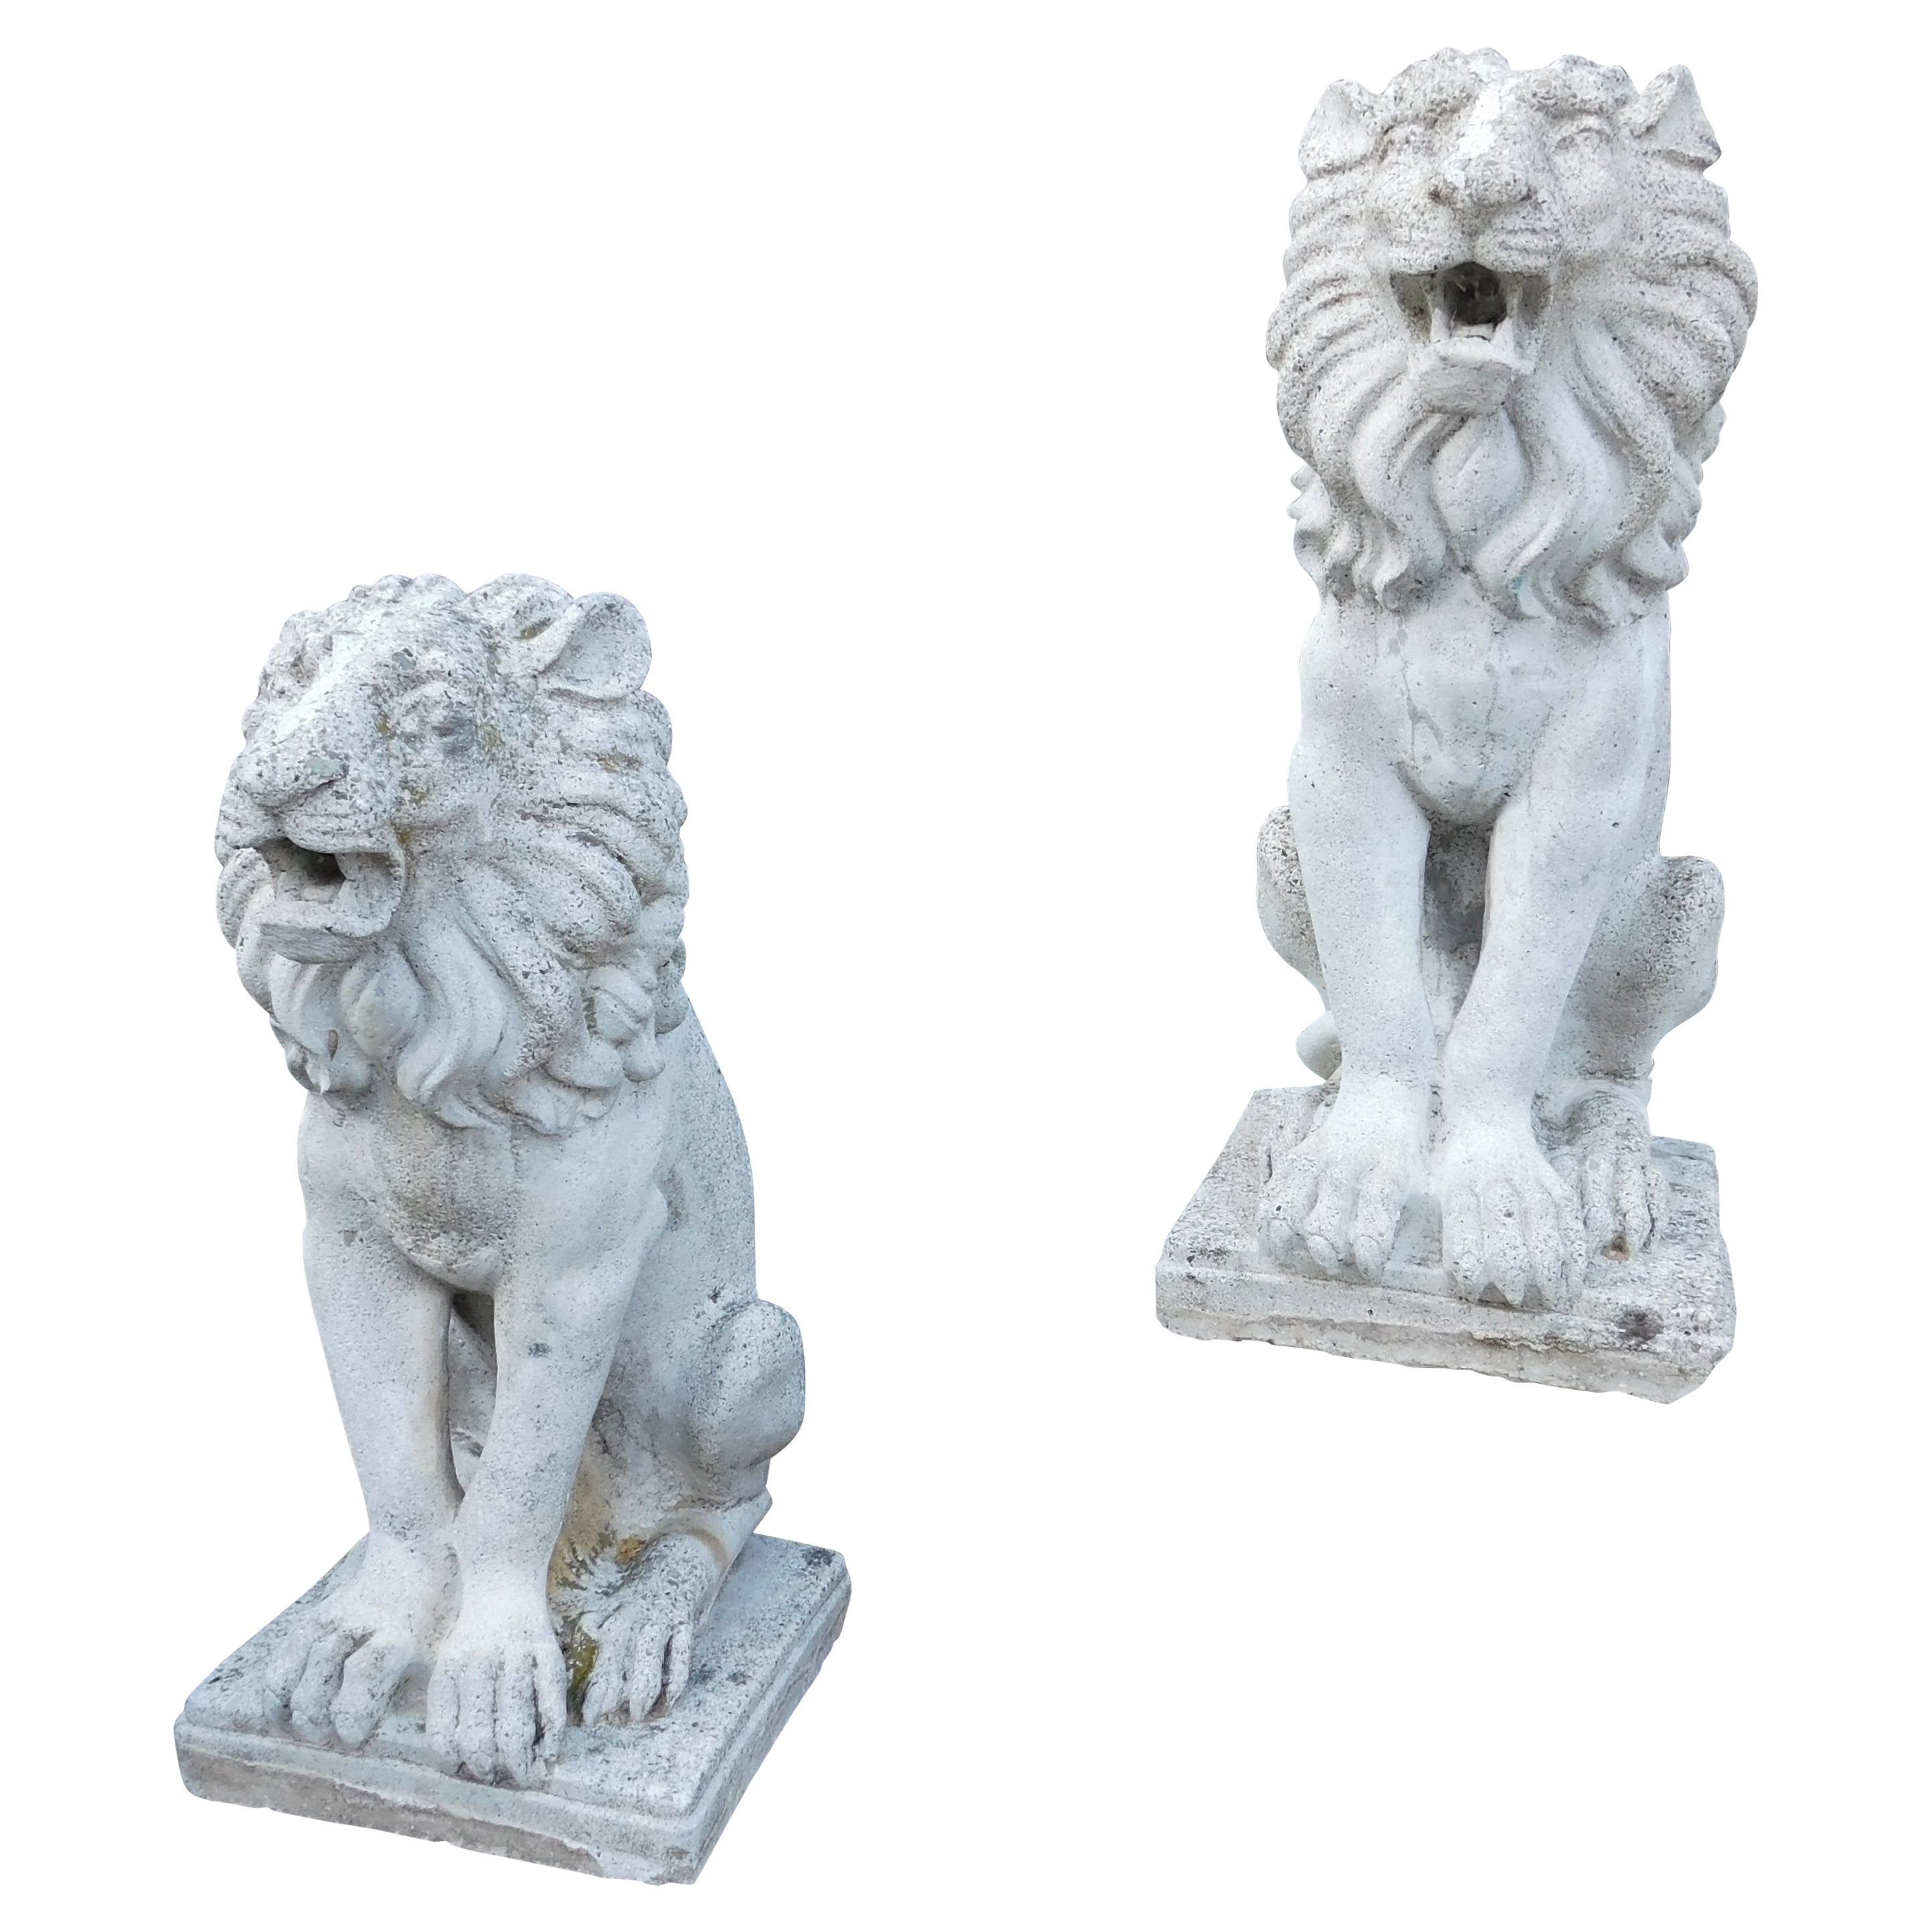 Pair of Vintage Concrete Lions for Garden, 1900s, Italy